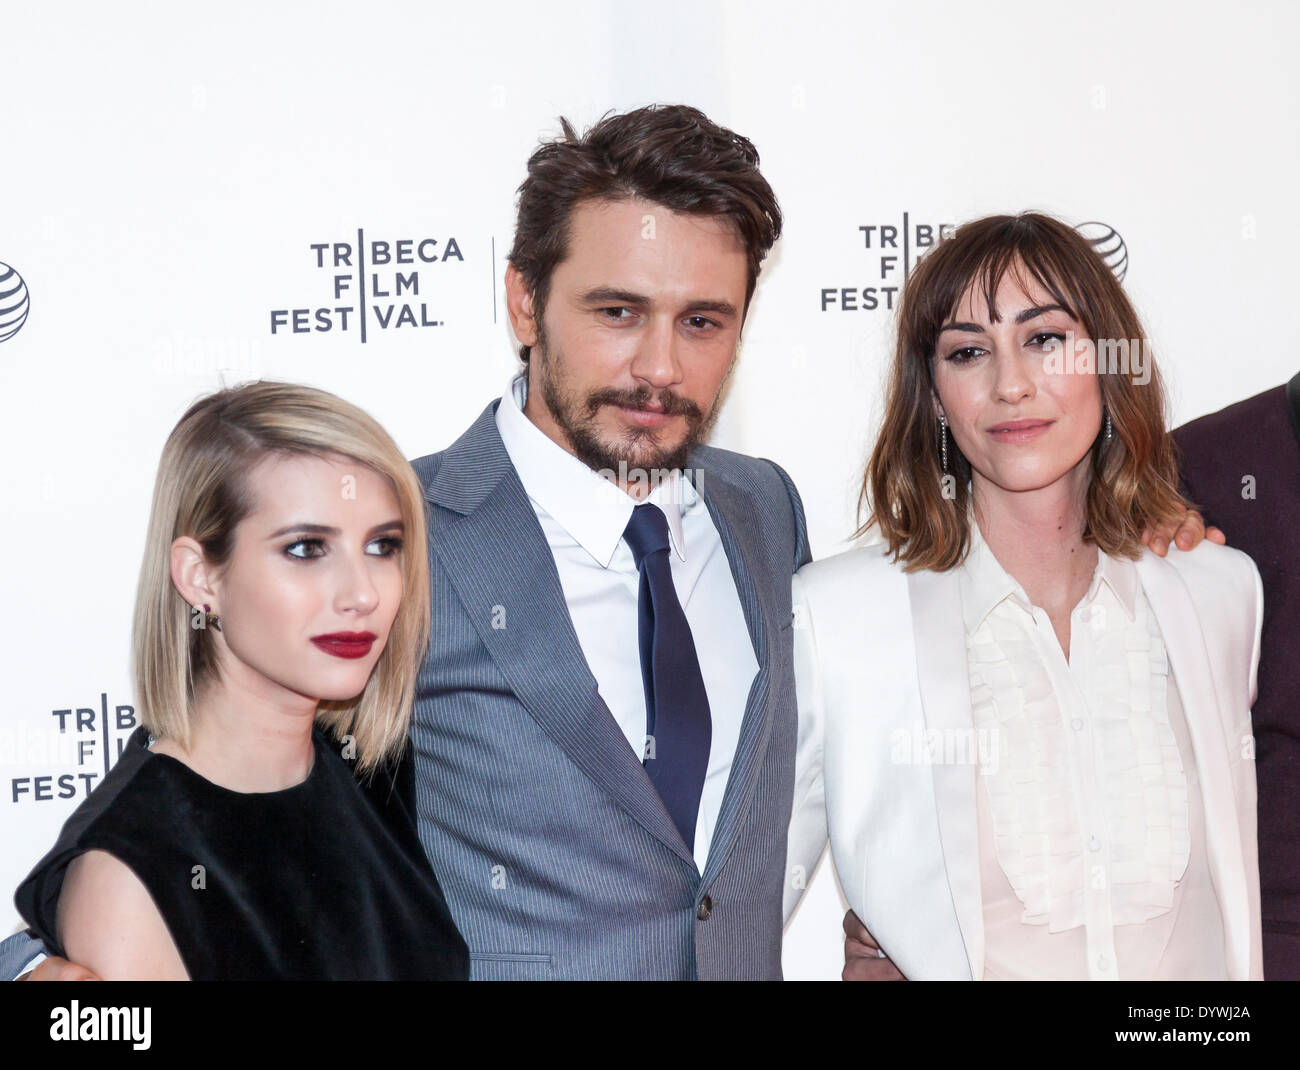 New York, NY, USA - April 24, 2014: (L-R) Emma Roberts, James Franco and Gia Coppola, attend the 'Palo Alto' Premiere during the 2014 Tribeca Film Festival at the SVA Theater in New York City Stock Photo